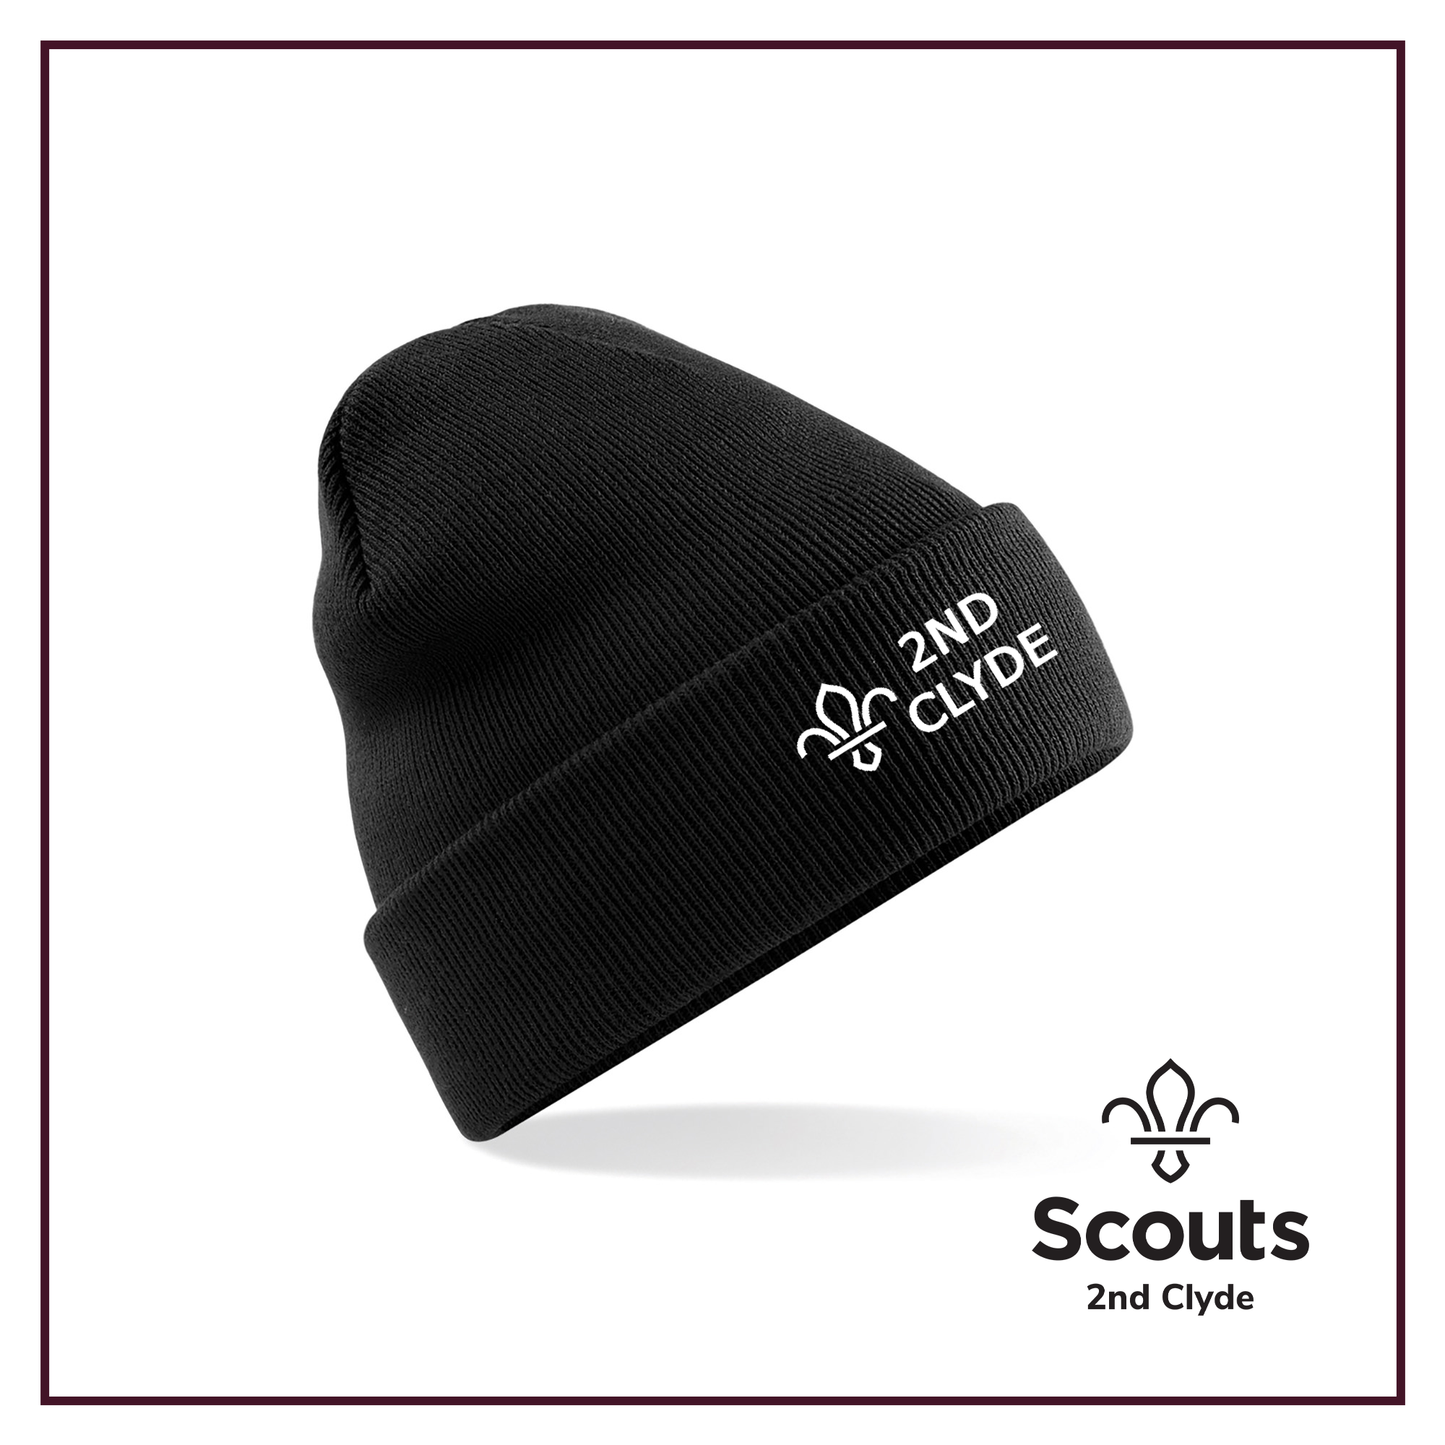 2nd Clyde Scouts - Embroidered Beanie